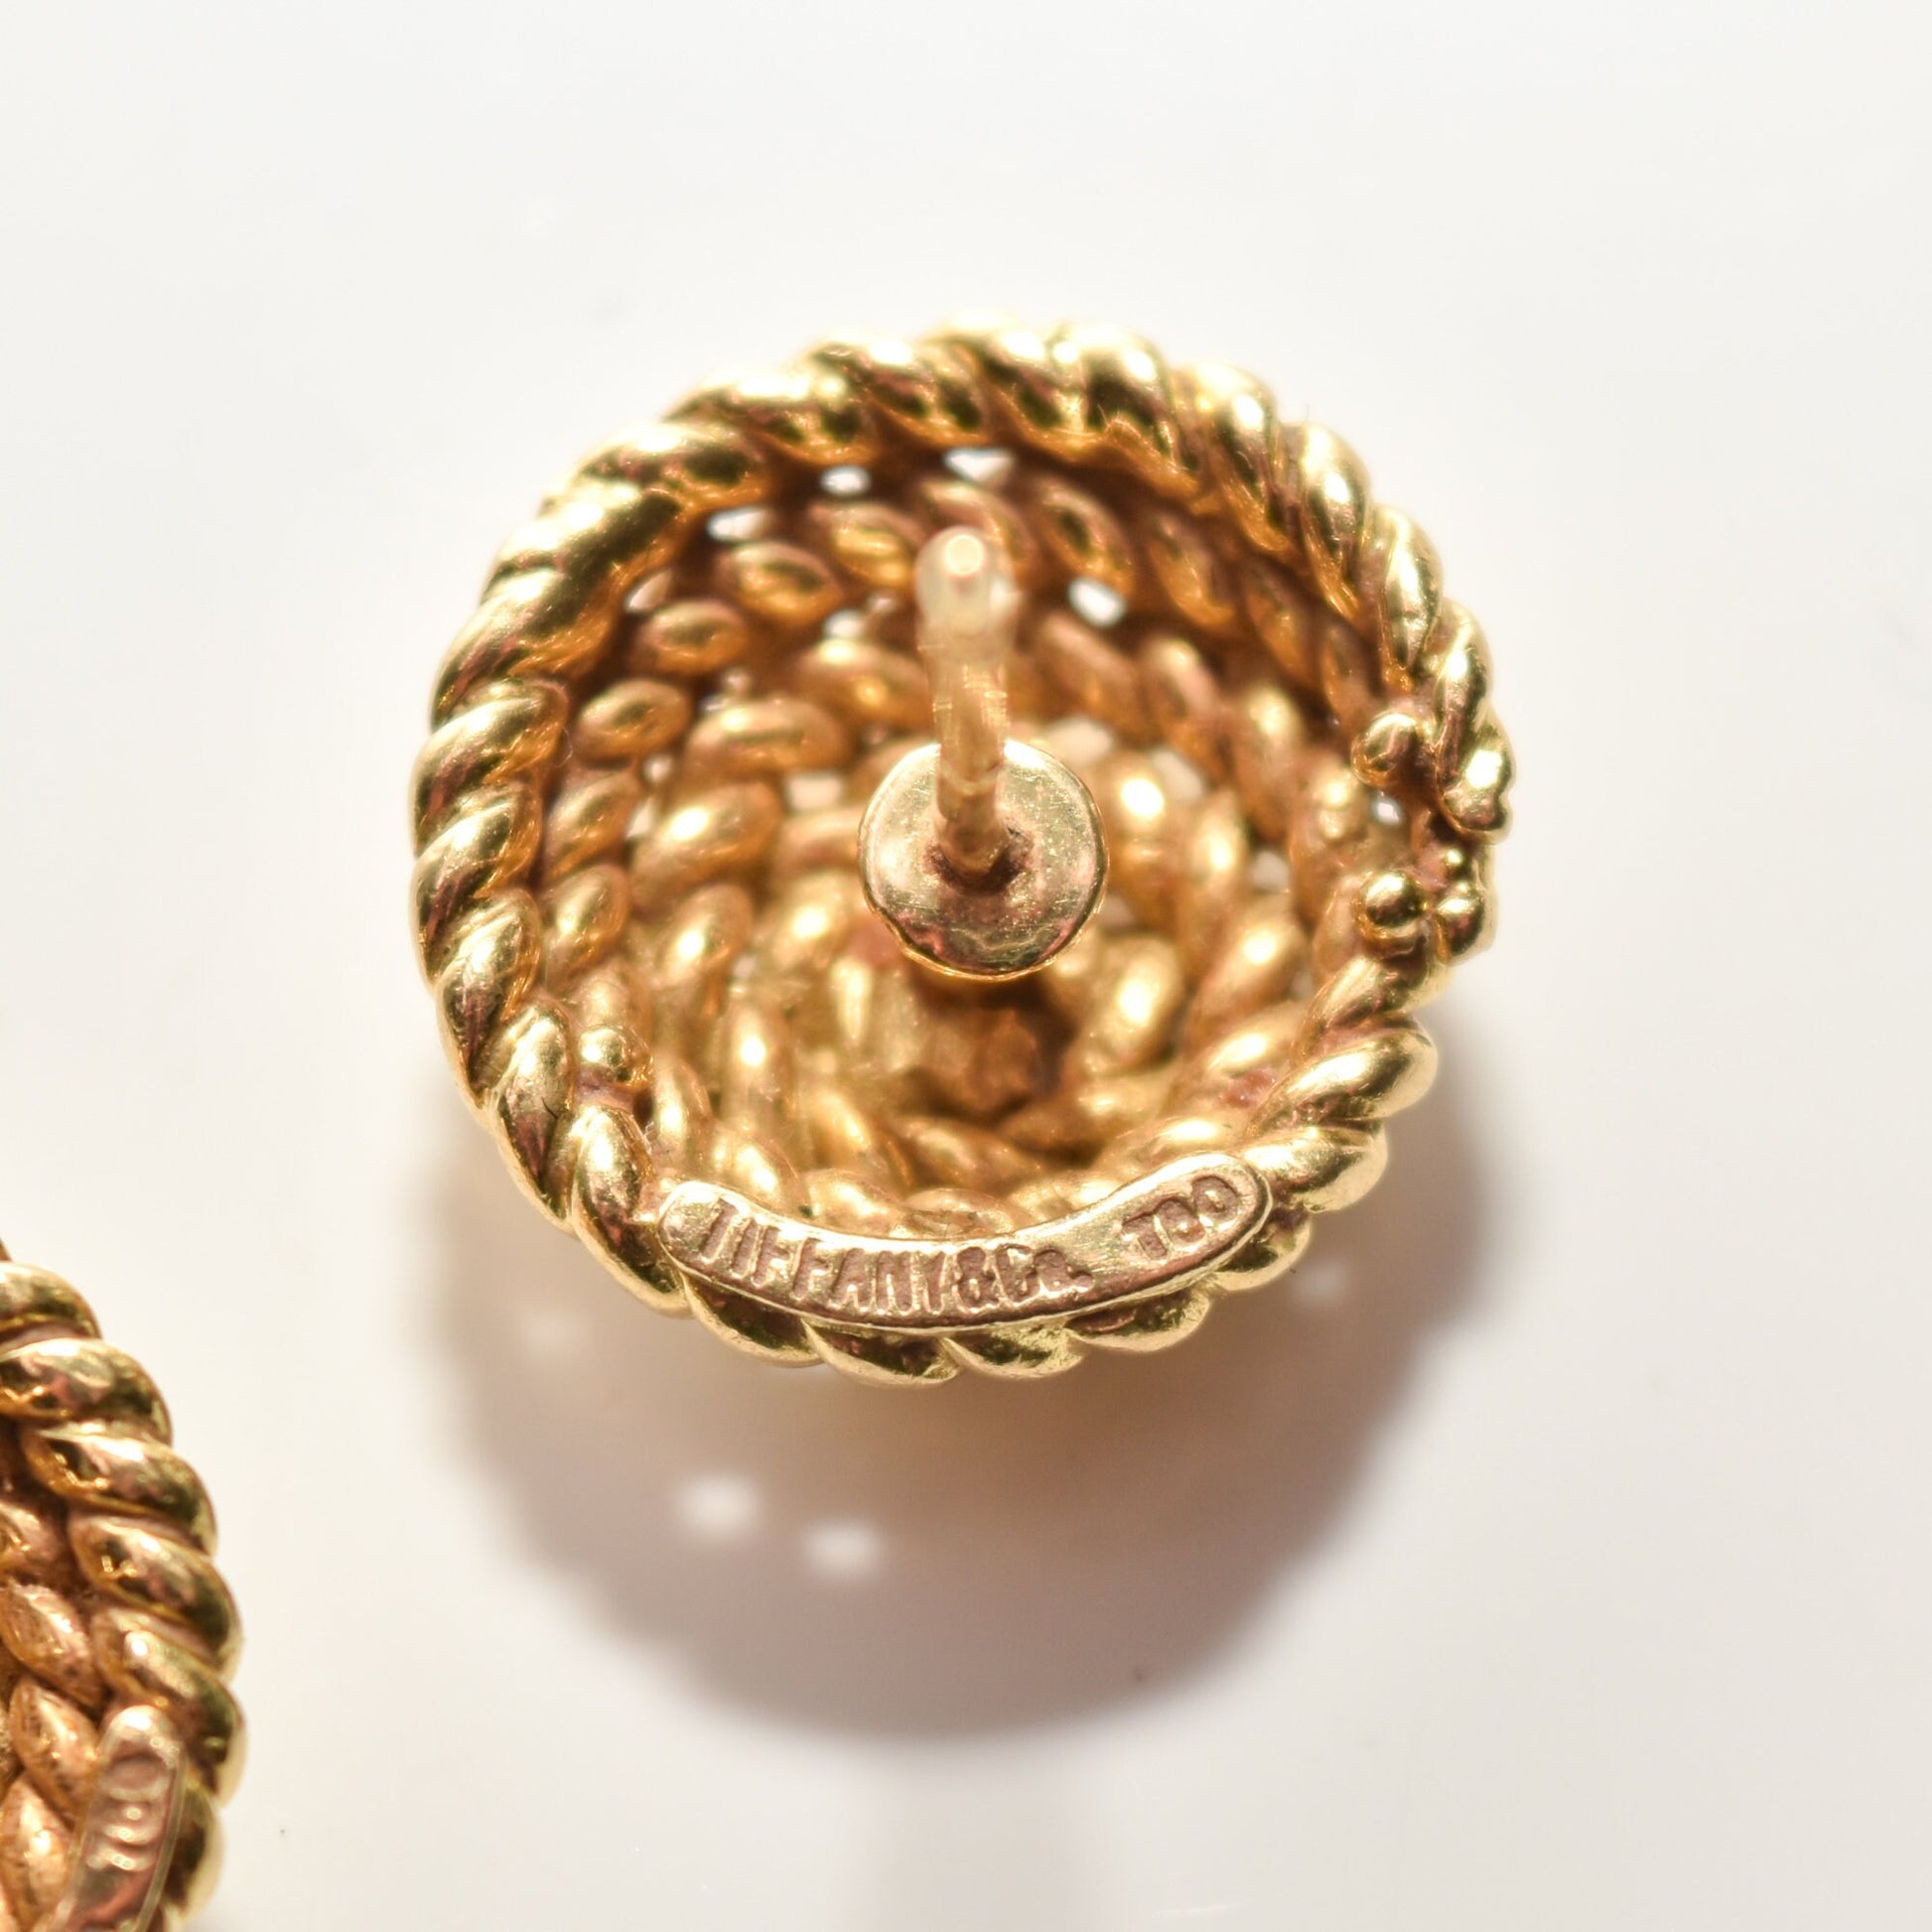 Tiffany & Co Schlumberger 18K gold coiled rope button stud earrings, intricate woven design, high-end estate jewelry close-up, 14.5mm size